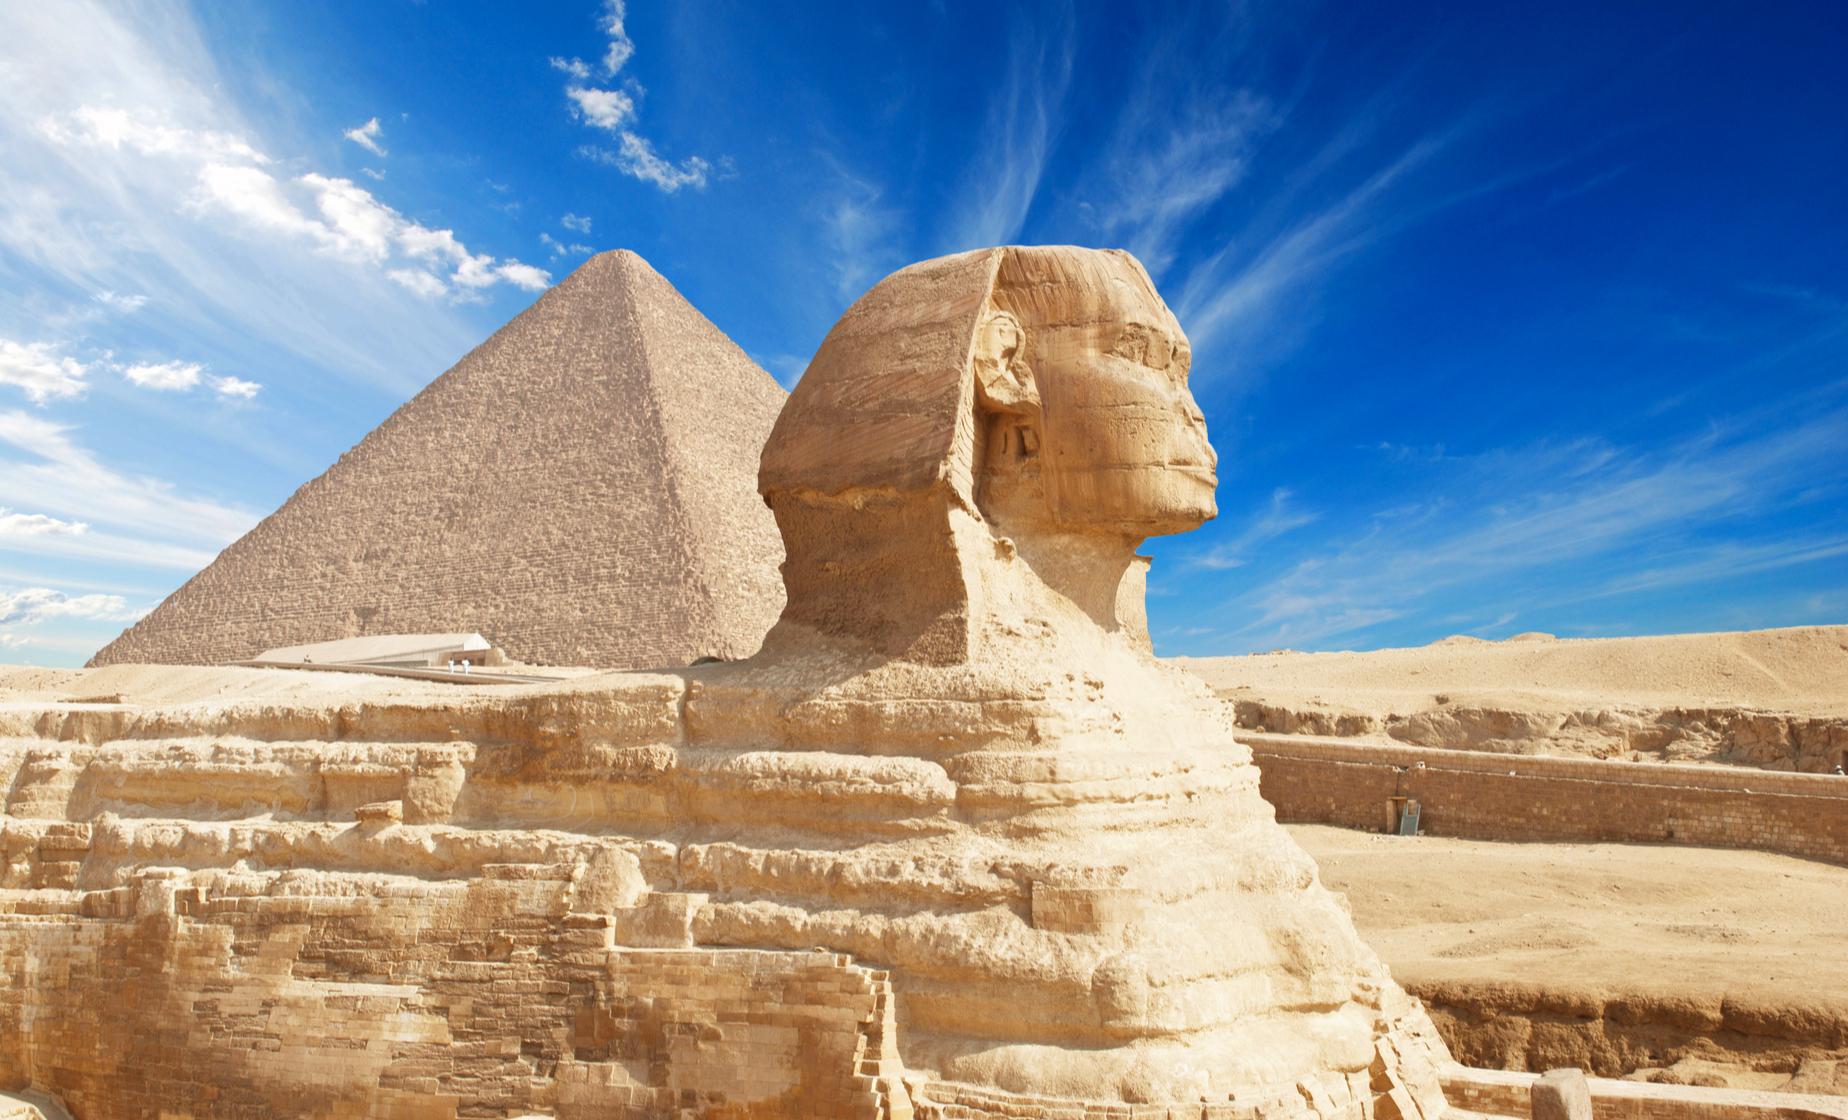 Two Day Best of Cairo Tour with Overnight Hotel (Giza Plateau, Citadel of Saladin)